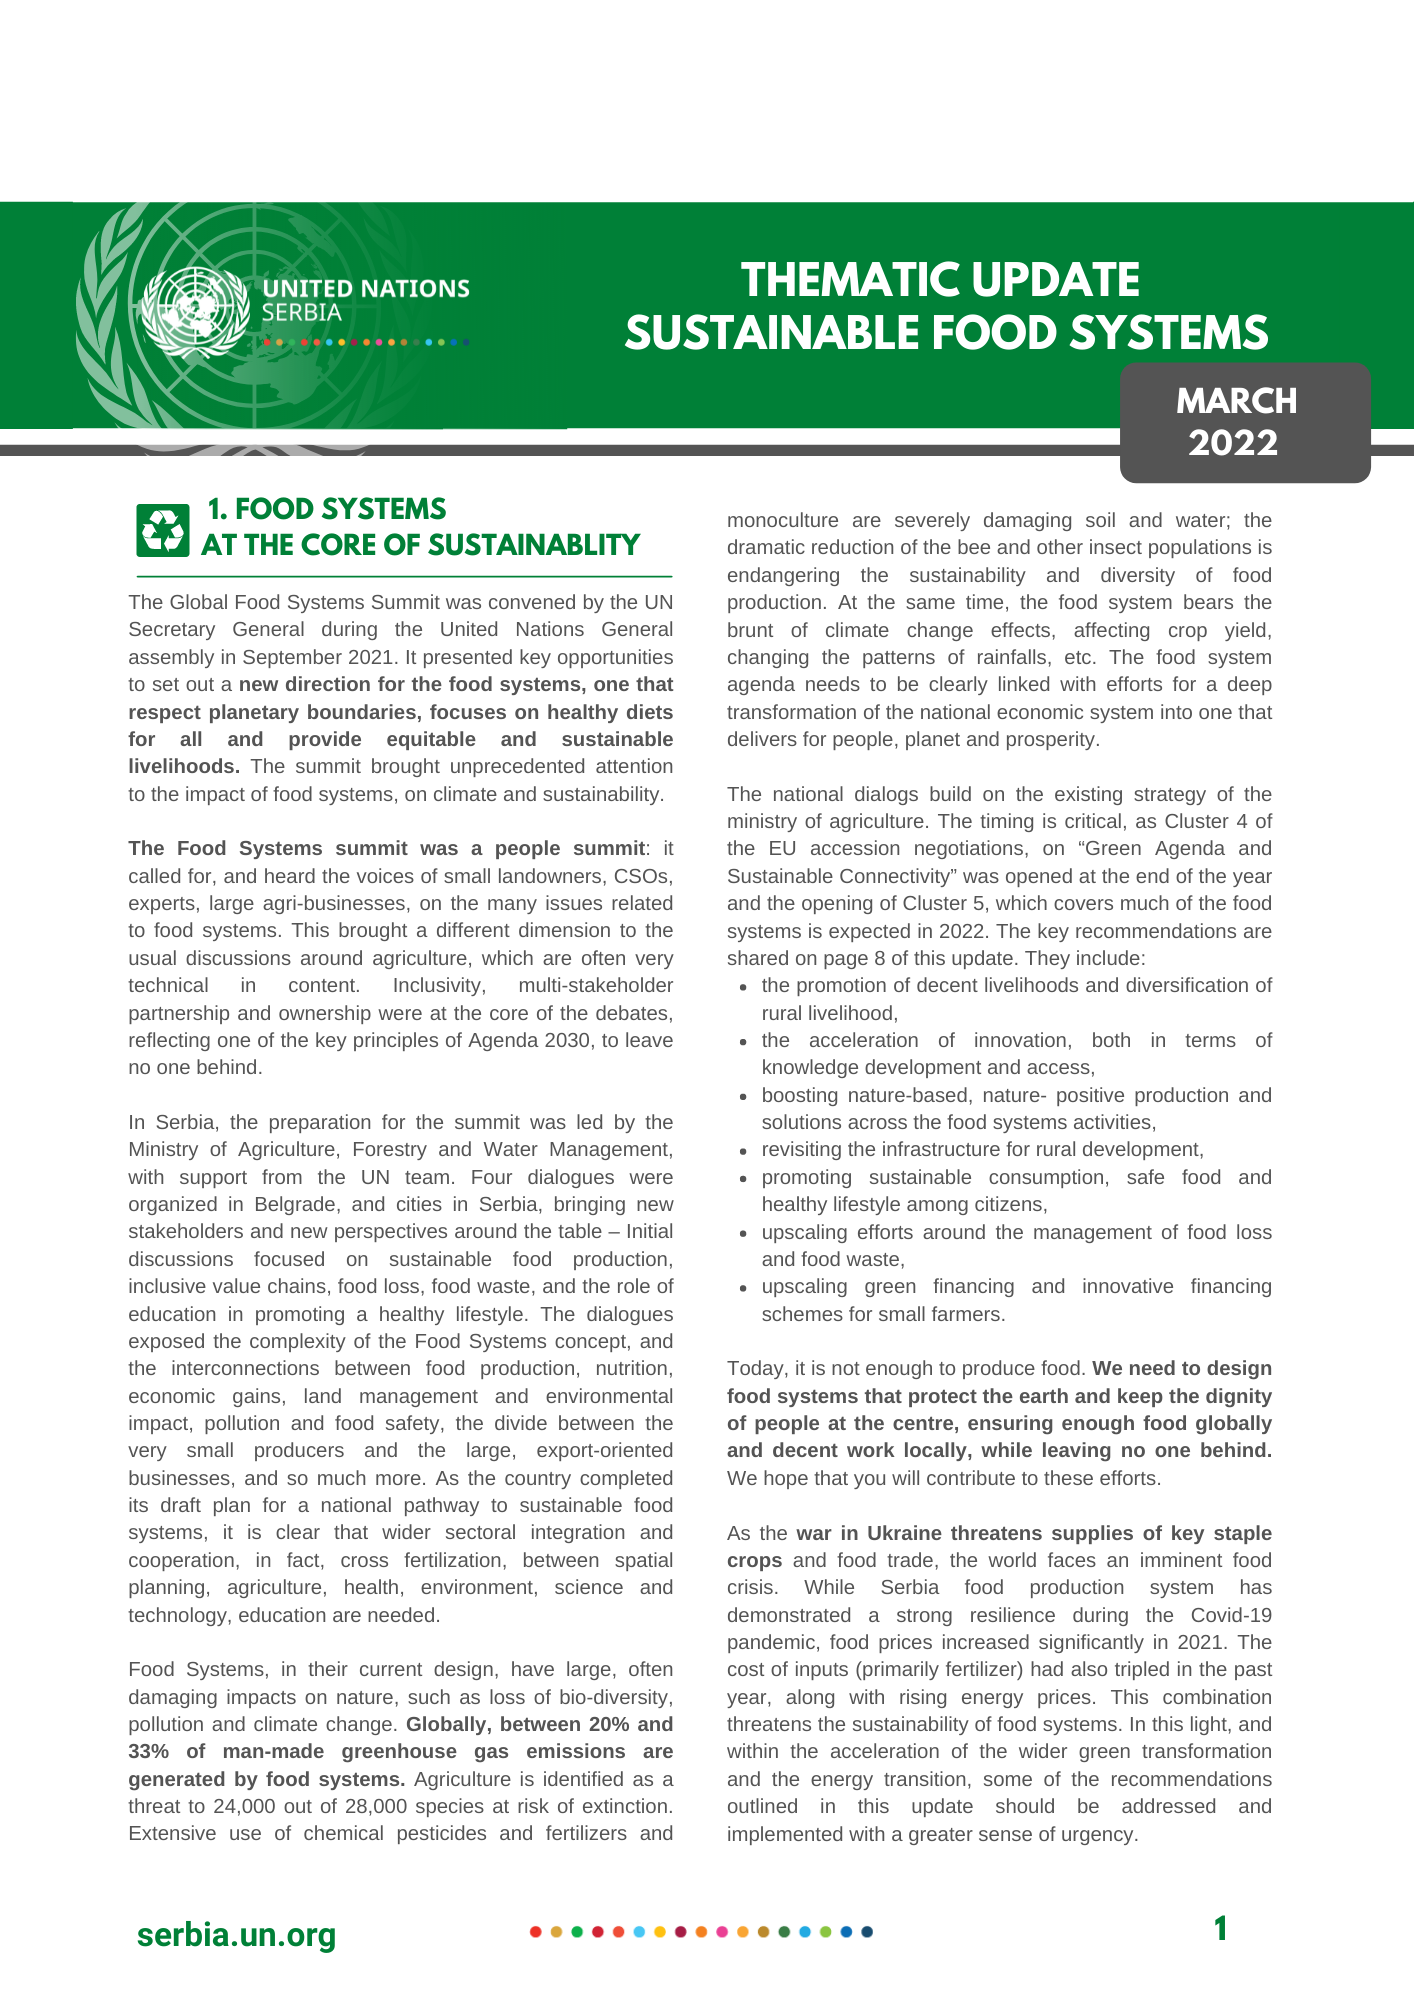 UN Serbia Thematic Update on Sustainable Food Systems 